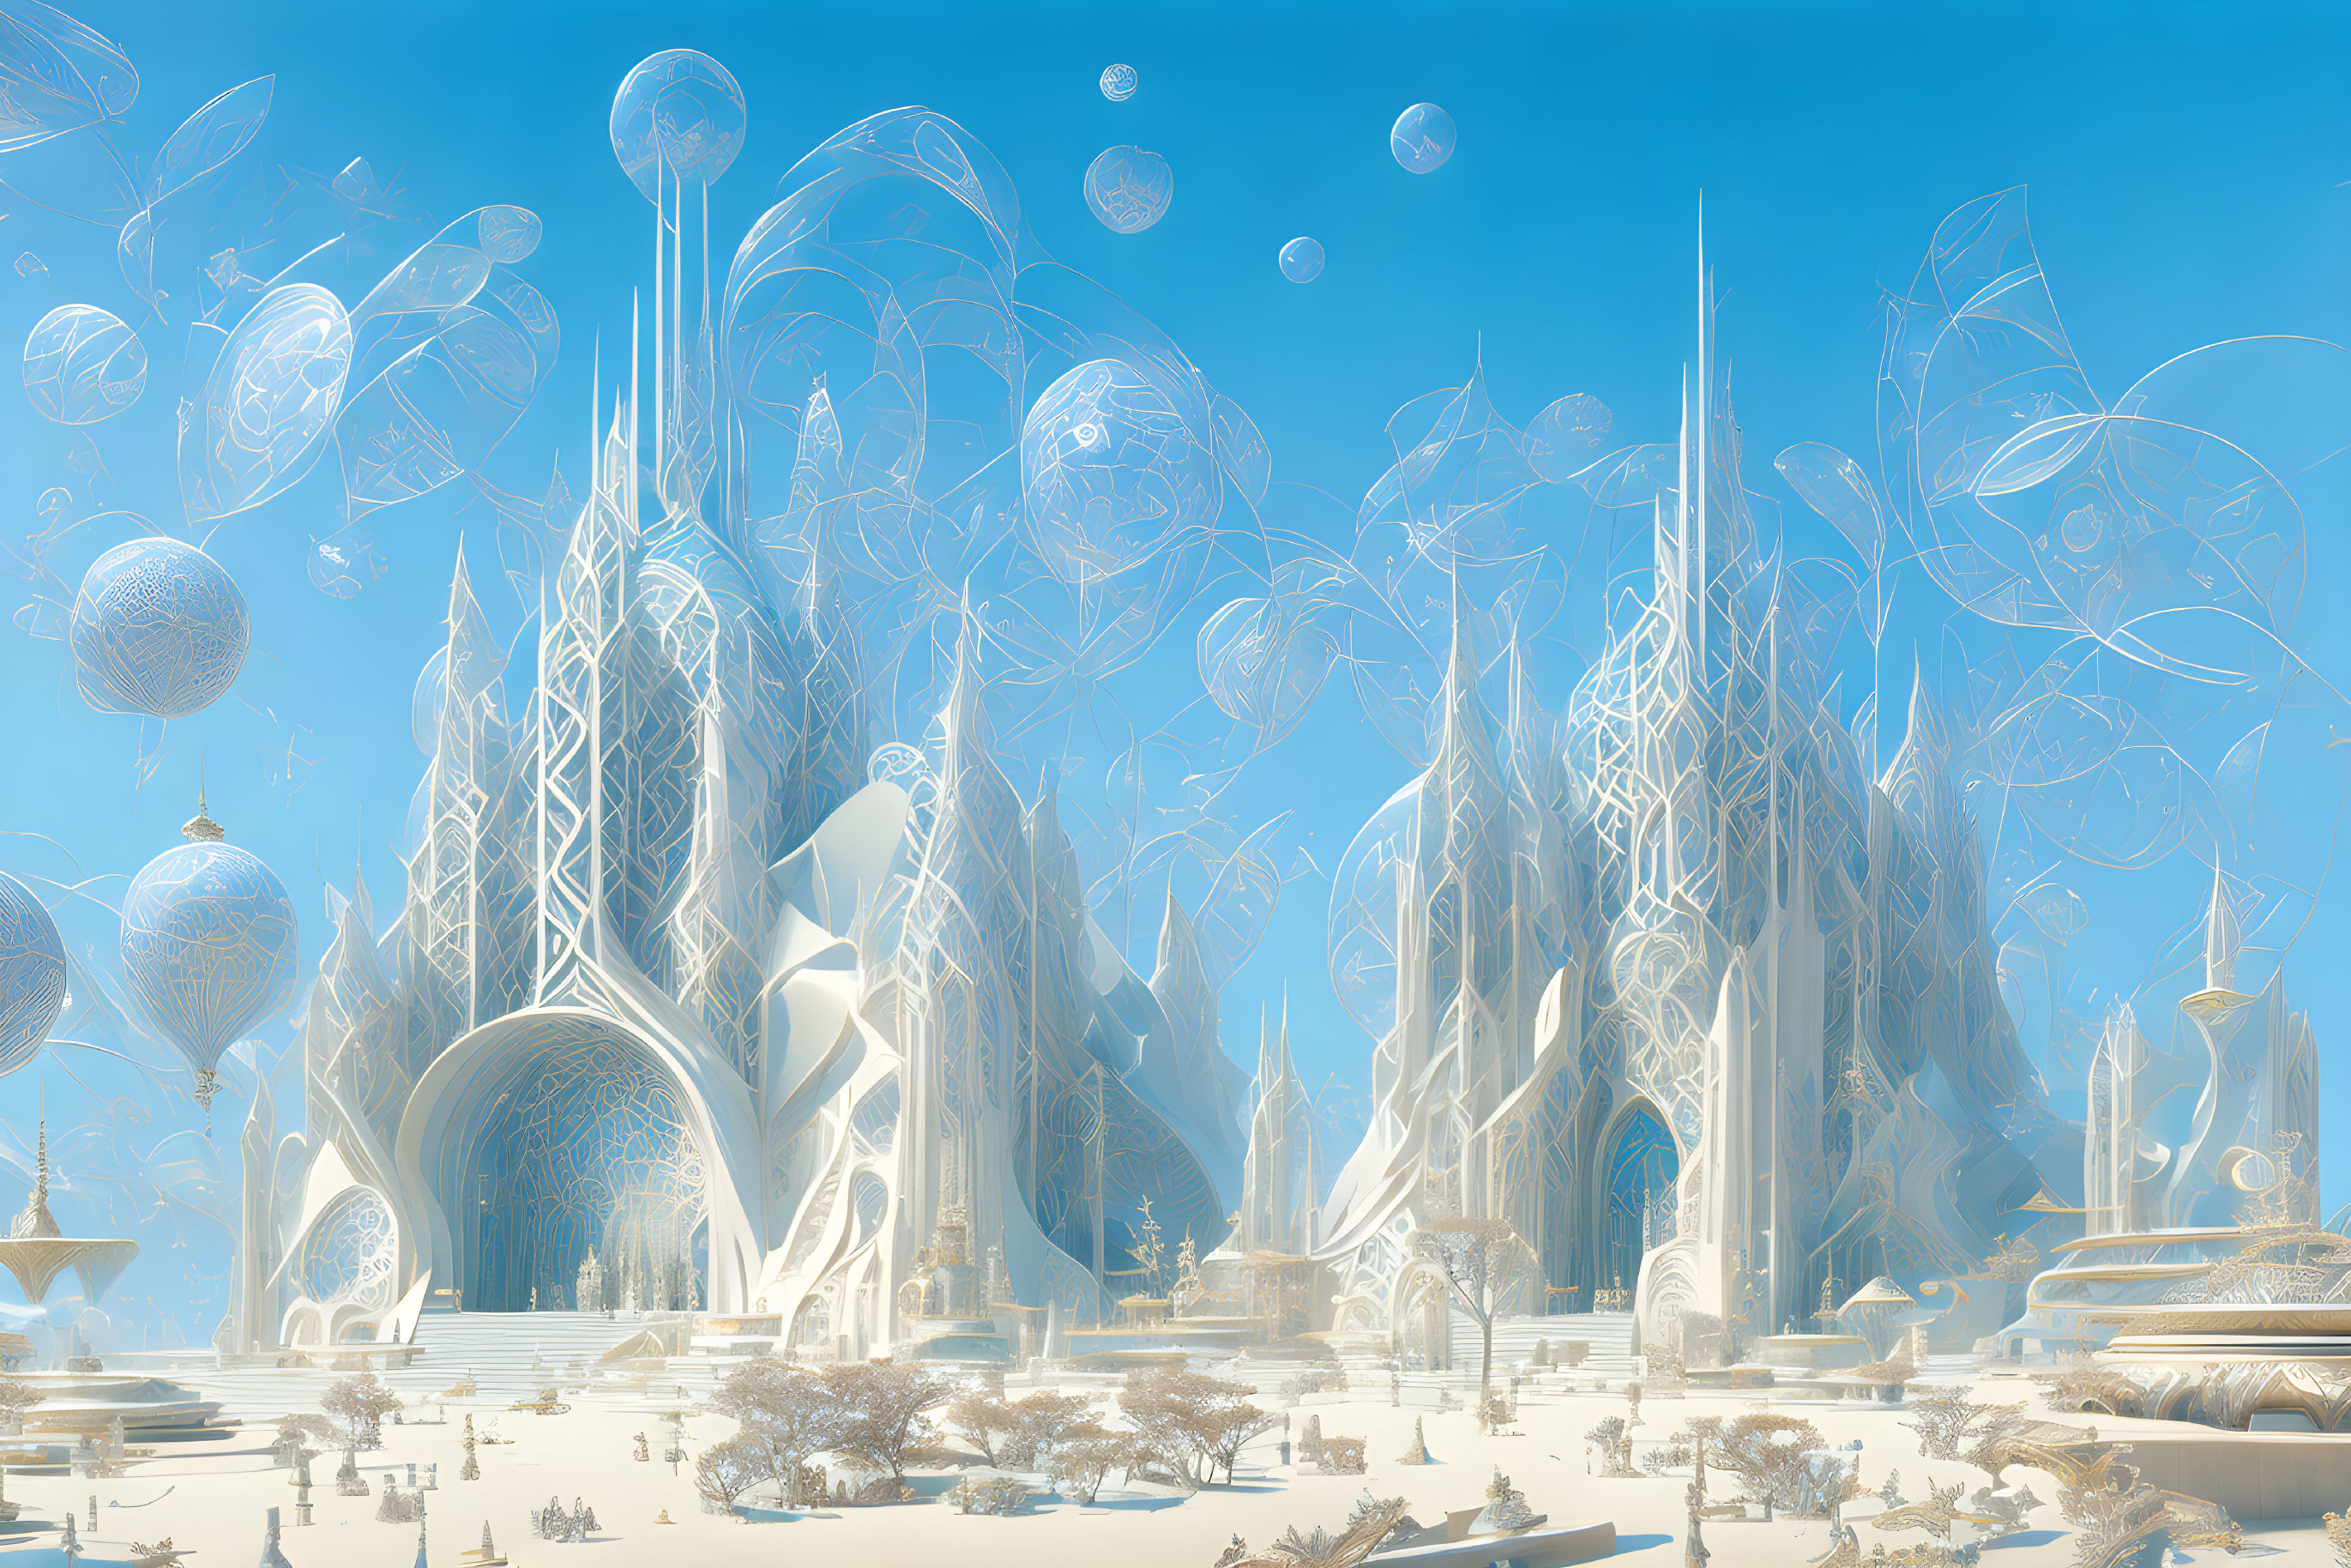 Ethereal City: Translucent Architecture